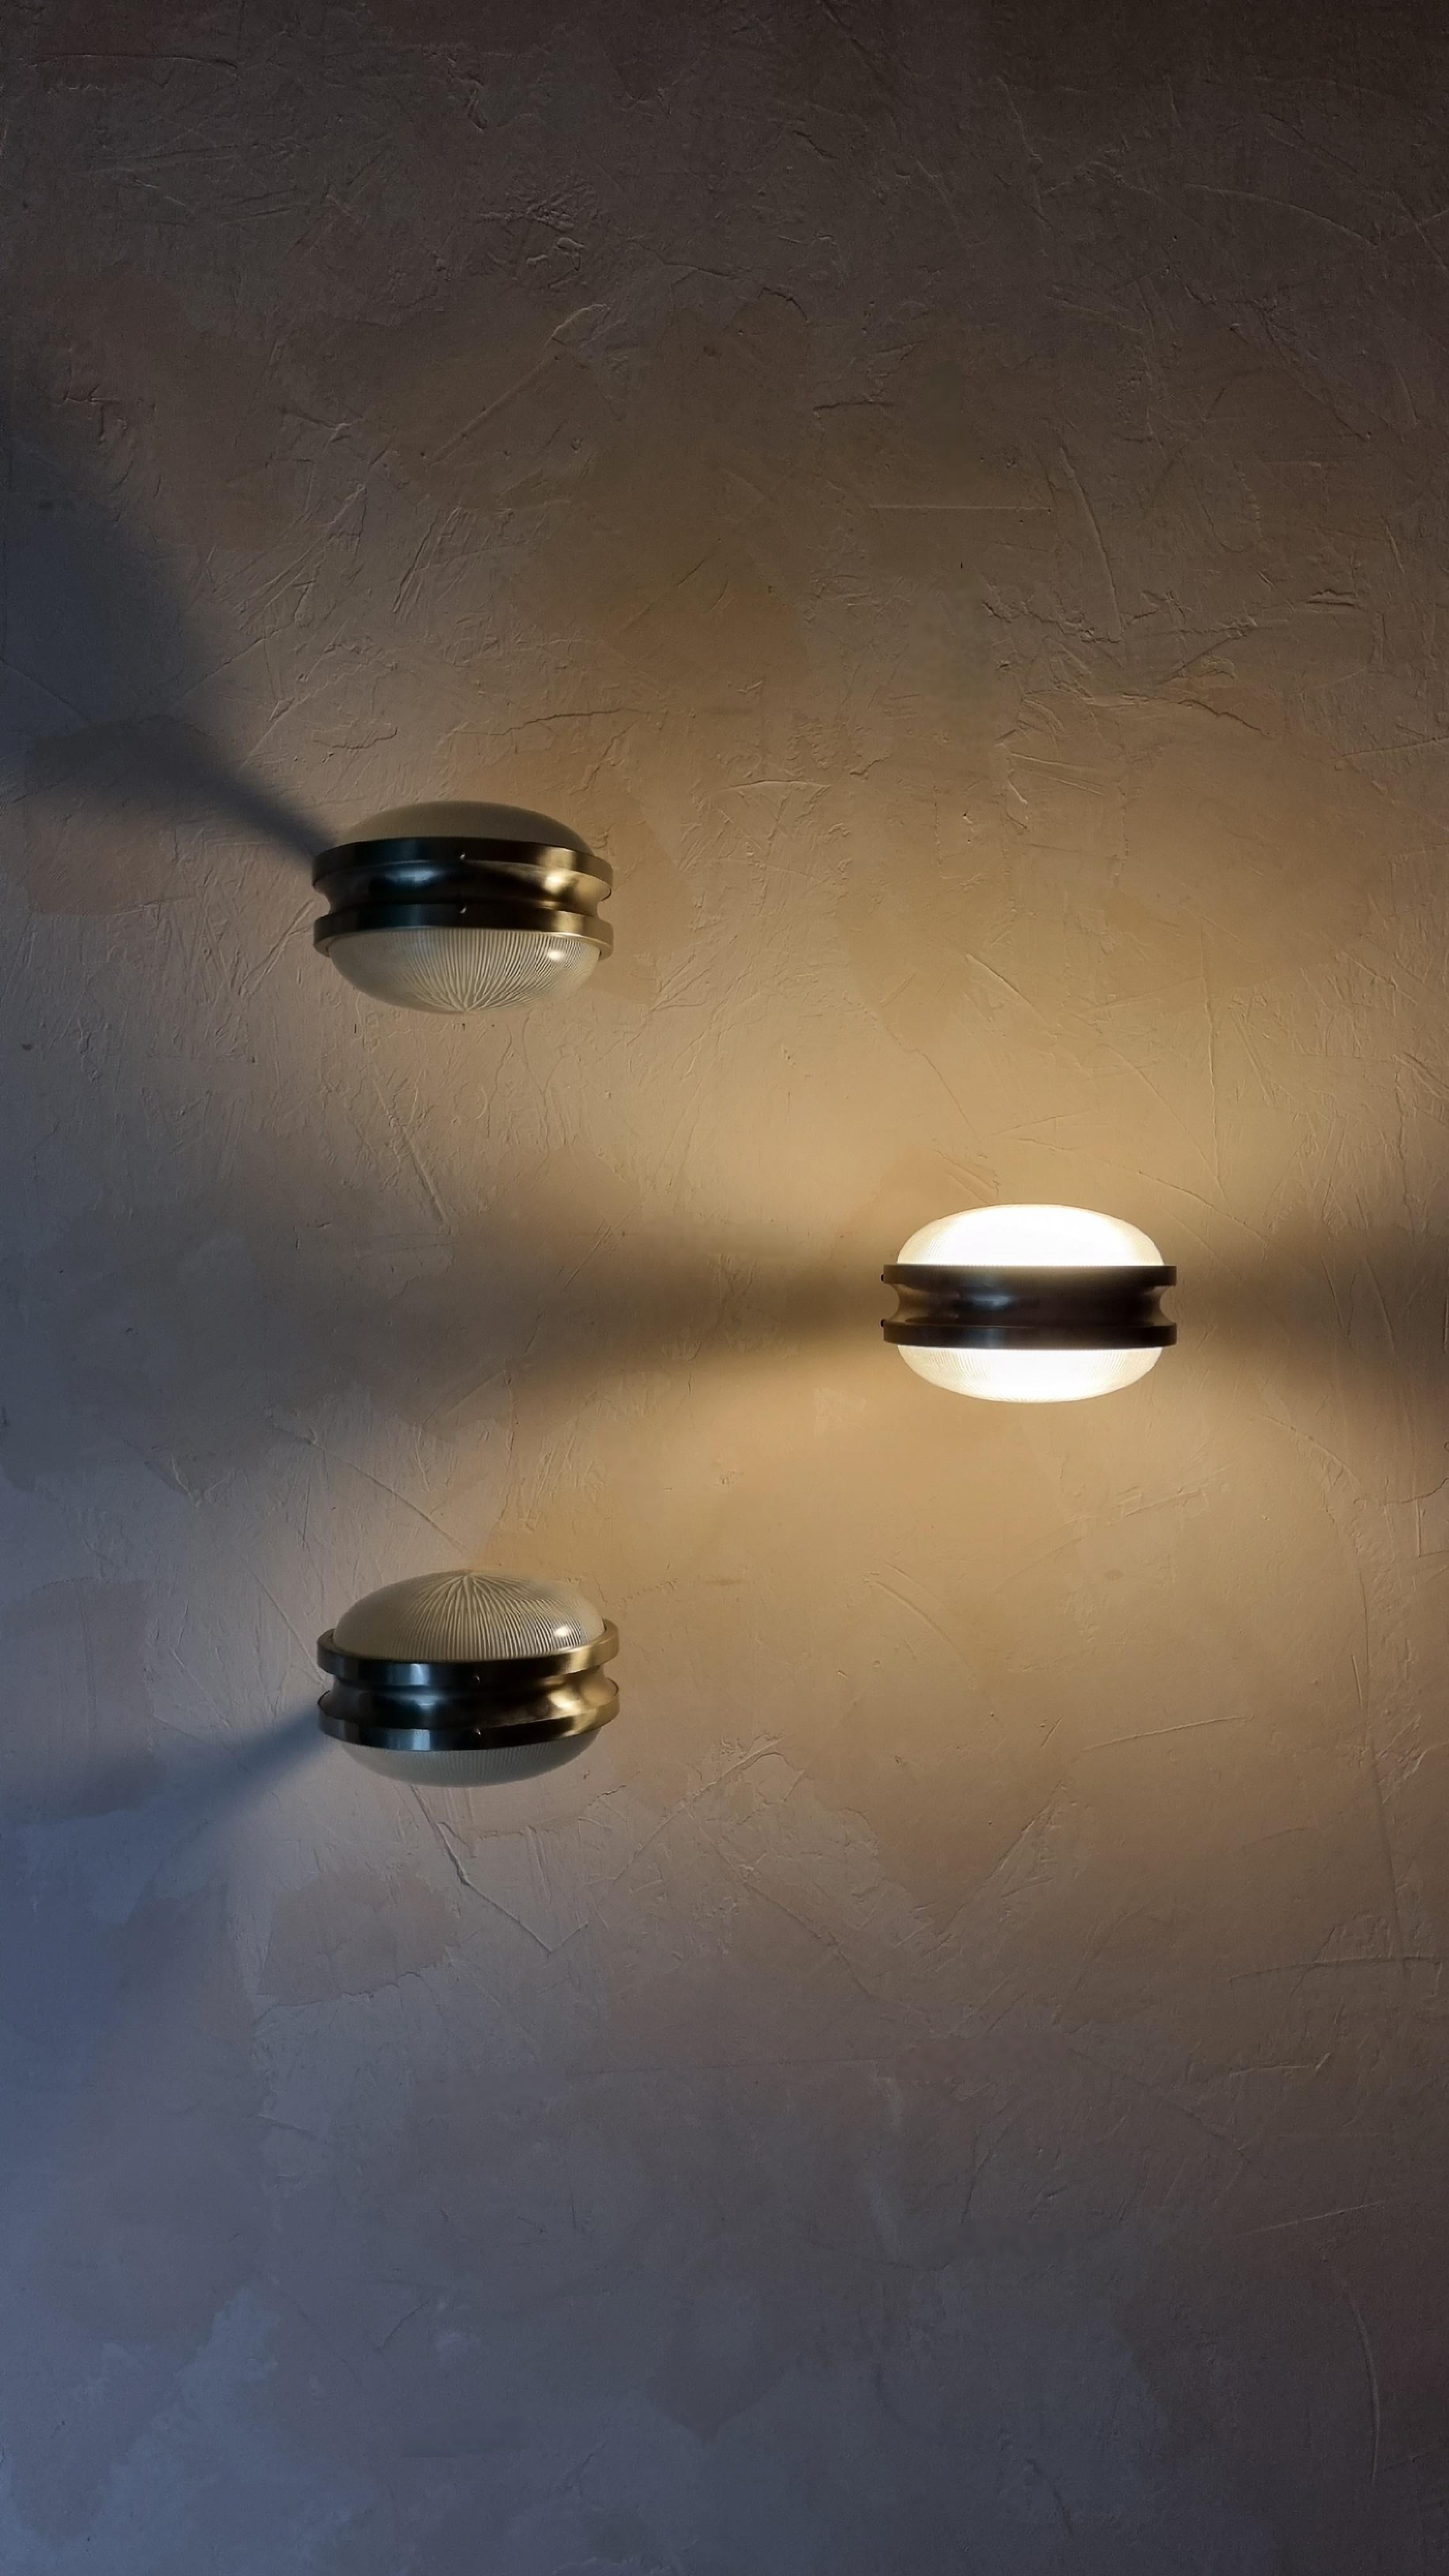 Set of 3 Gamma wall sconces designed by Sergio Mazza for Artemide in the 1960s, pressed crystal diffusers , structure in nickel-plated brass, each lamp  superimposed 2 light points that emit a warm and soft light. mounts E 27 bulbs.
Excellent